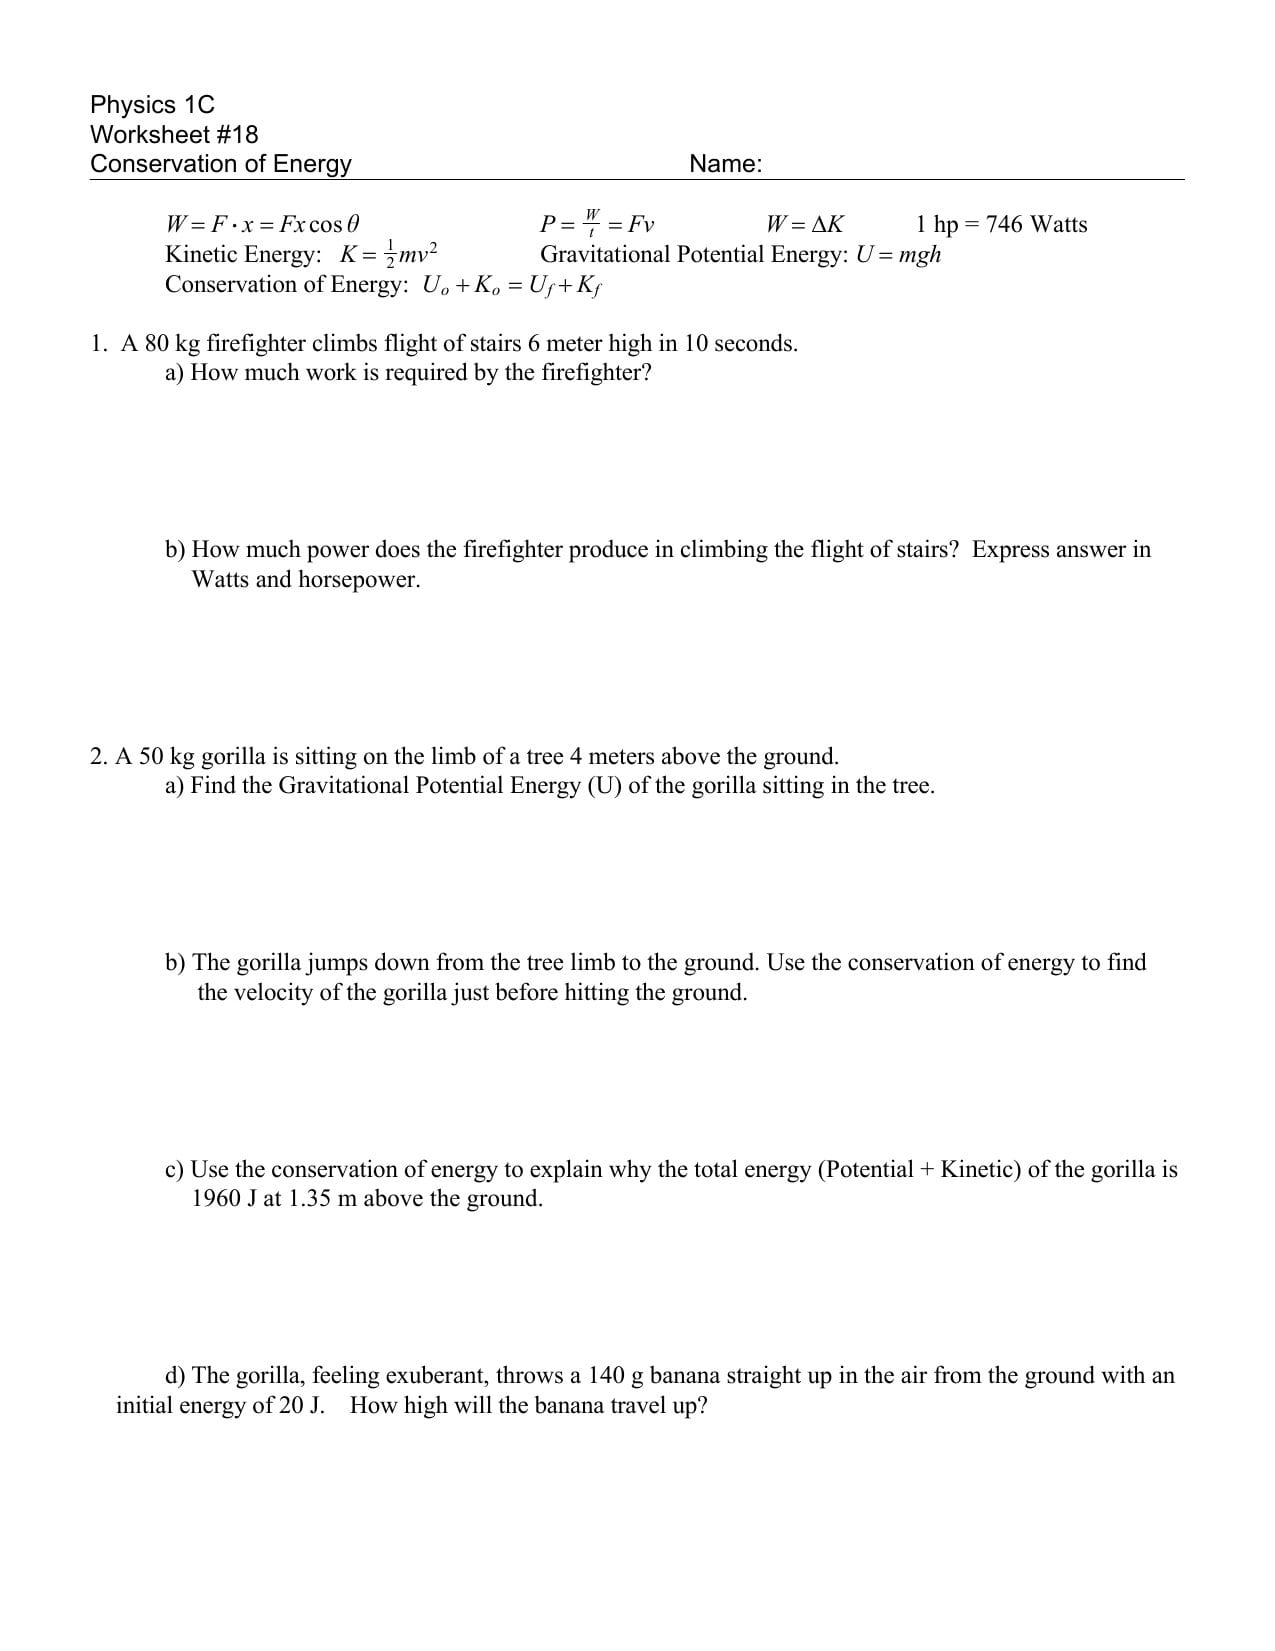 Physics 1C Worksheet 18 Conservation Of Energy And Conservation Of Energy Worksheet Answers